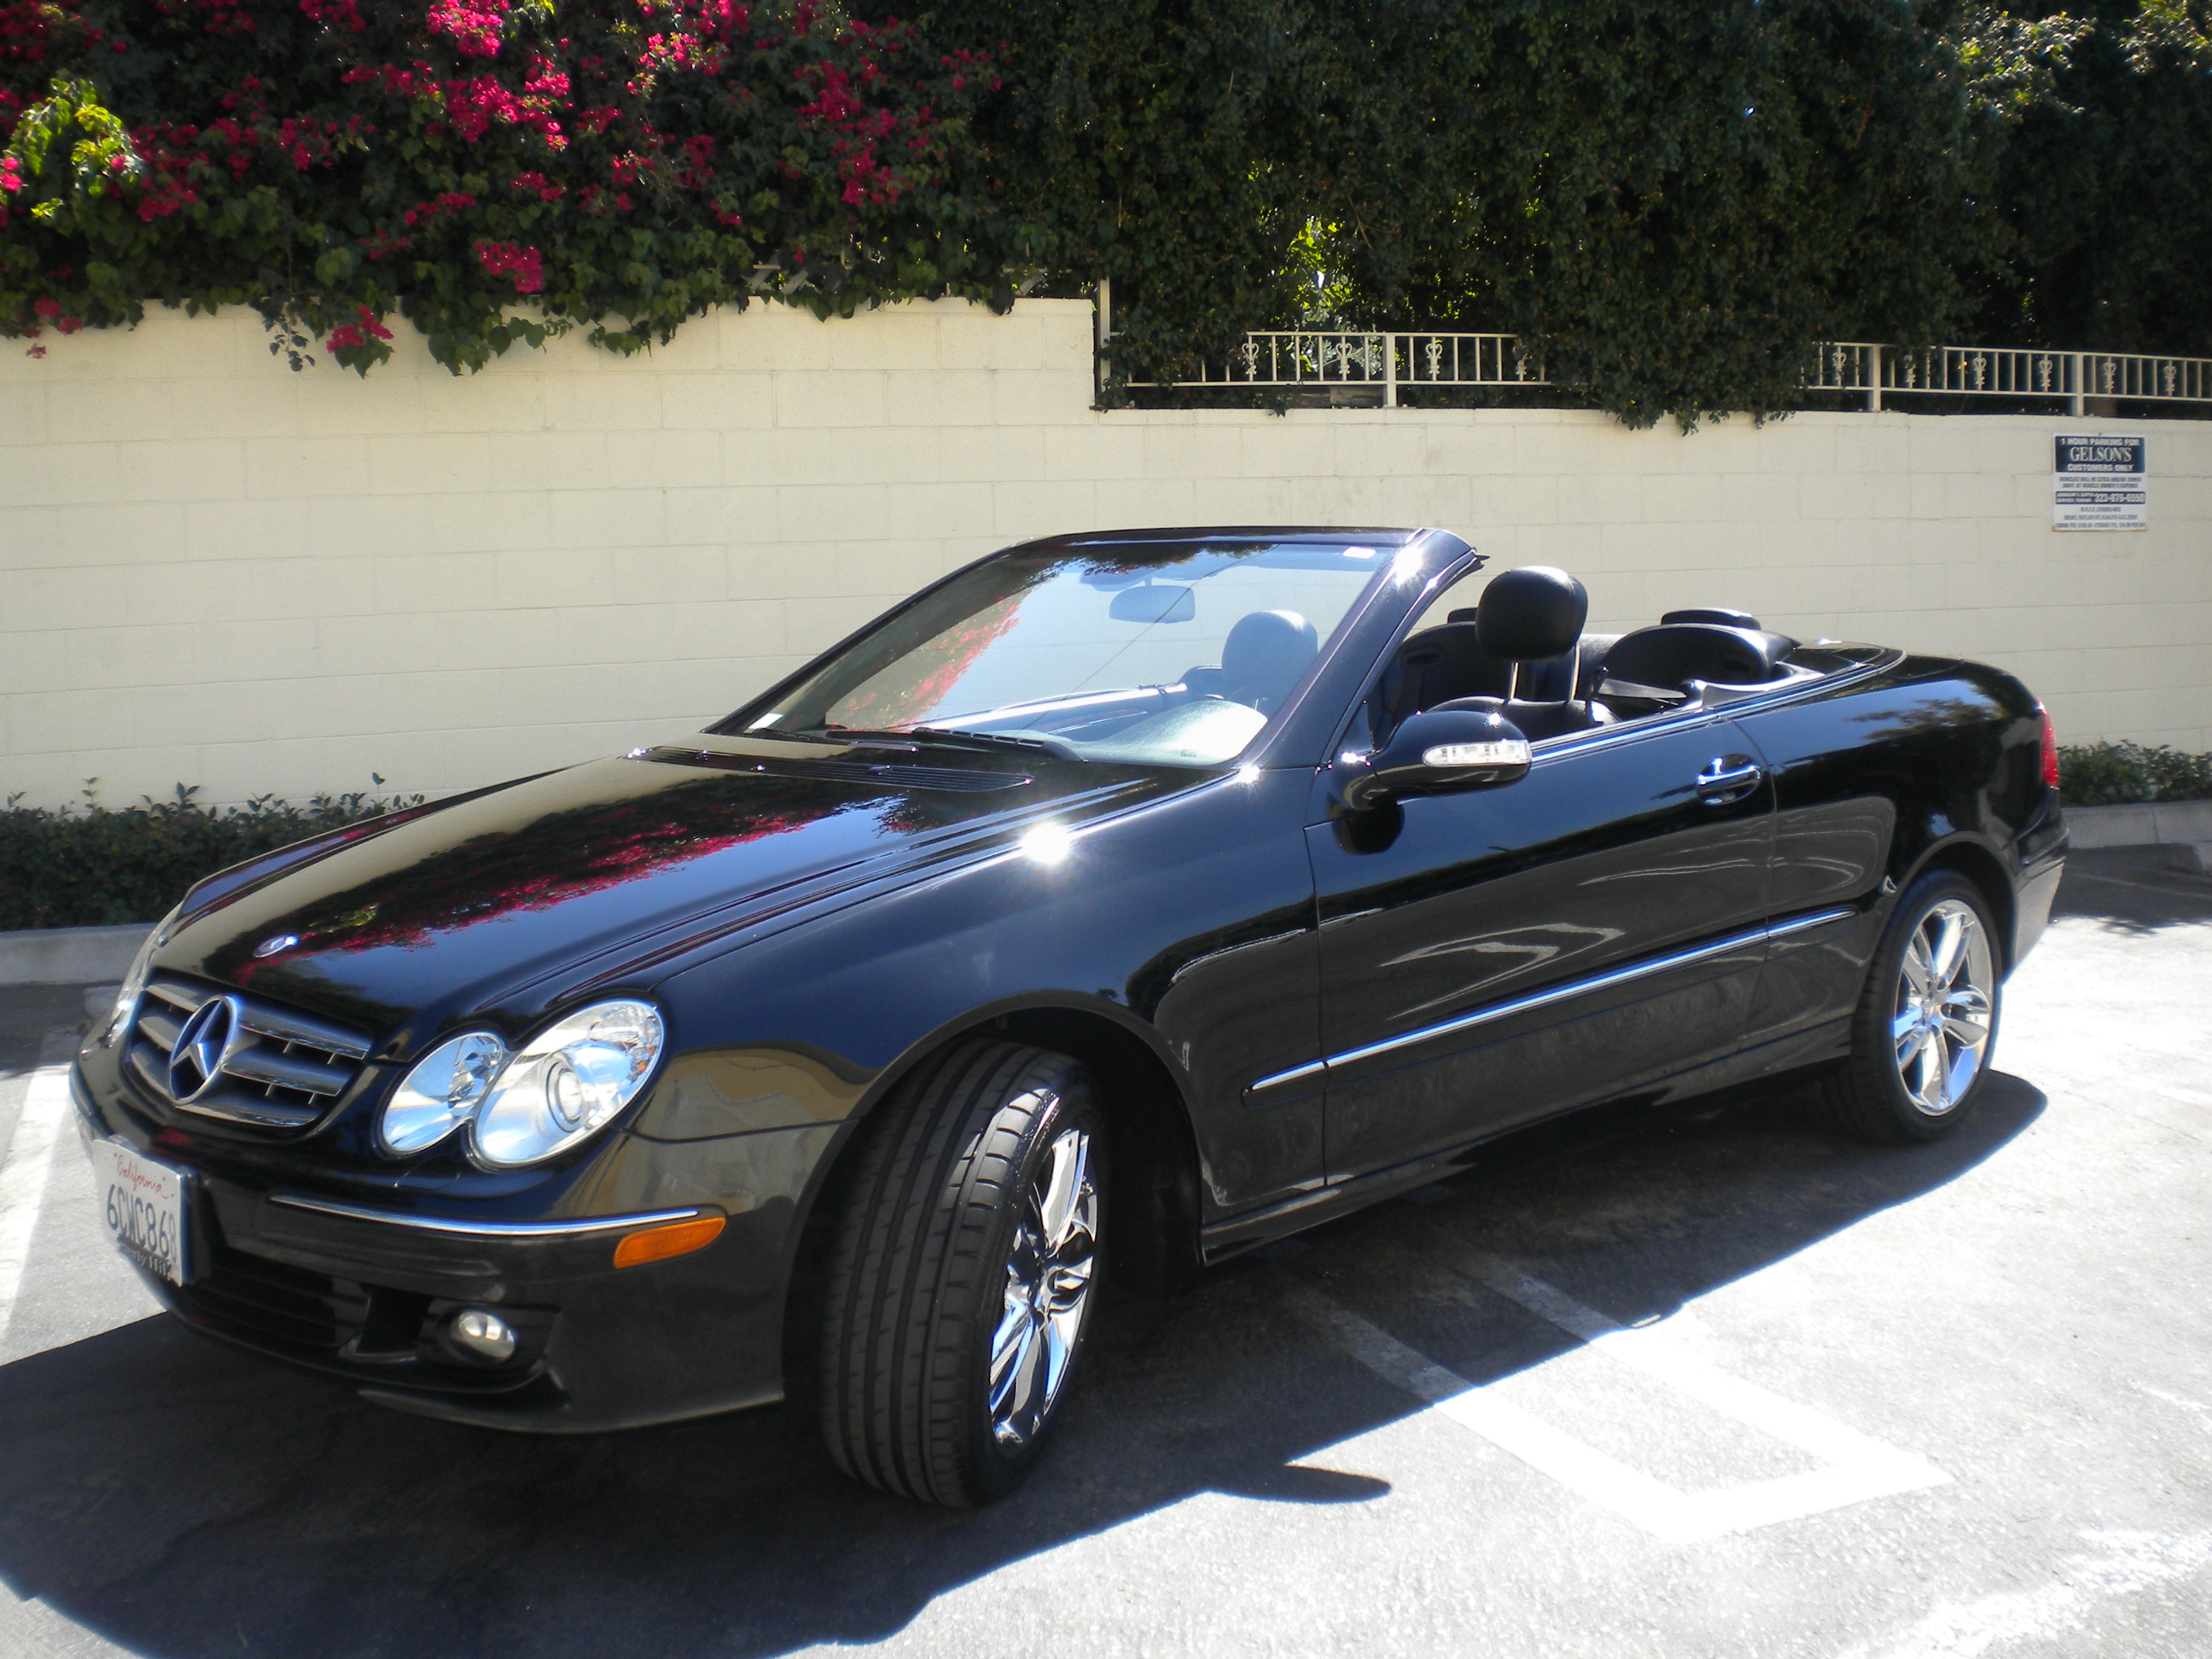 Britney Spears’ Iconic 2006 Mercedes-Benz CLK350 Now For Sale For $70,000